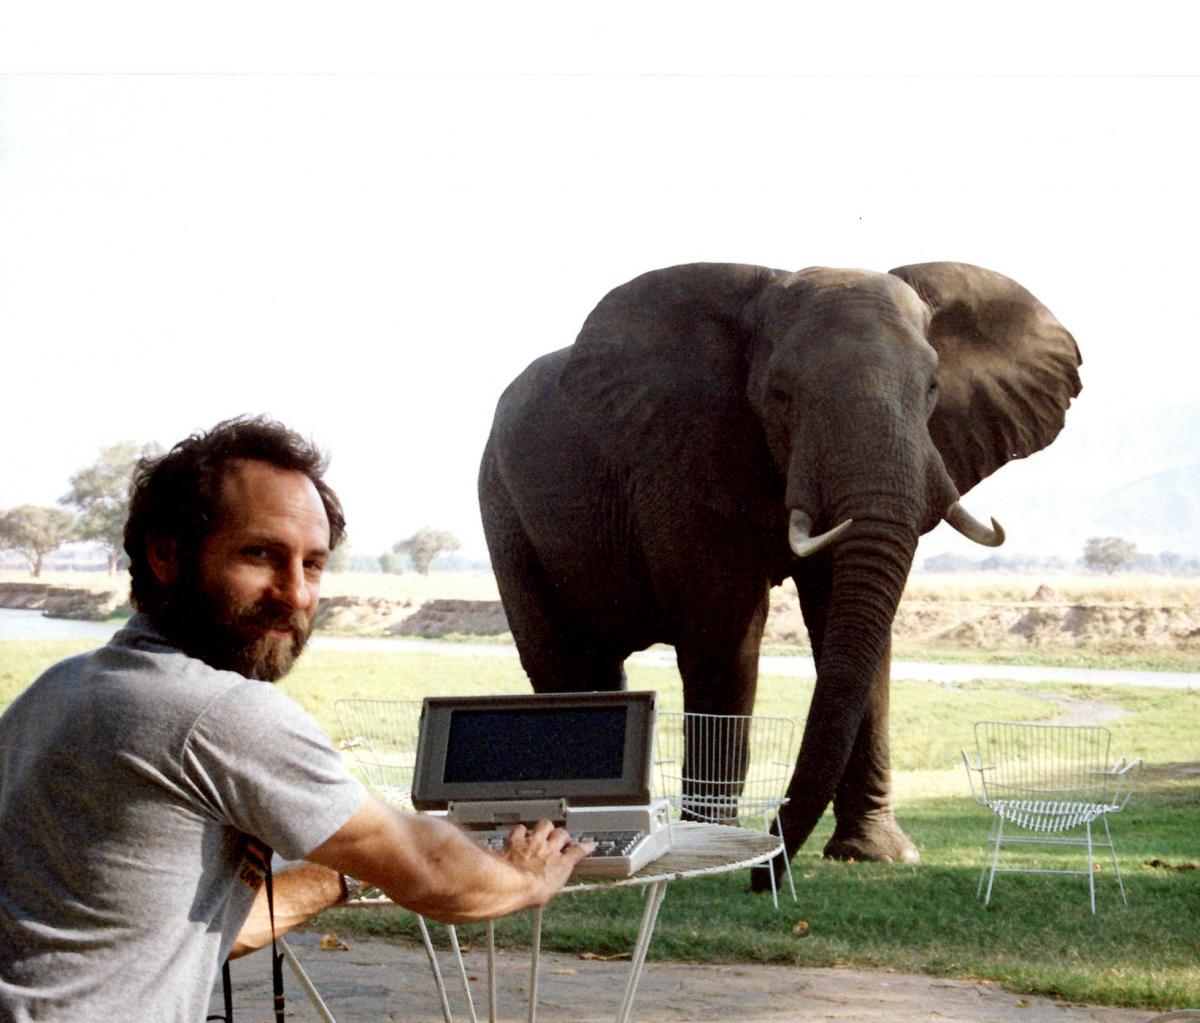 Dr. Jay Kravitz in Lesotho seated at a table with a laptop in front of an elephant. 